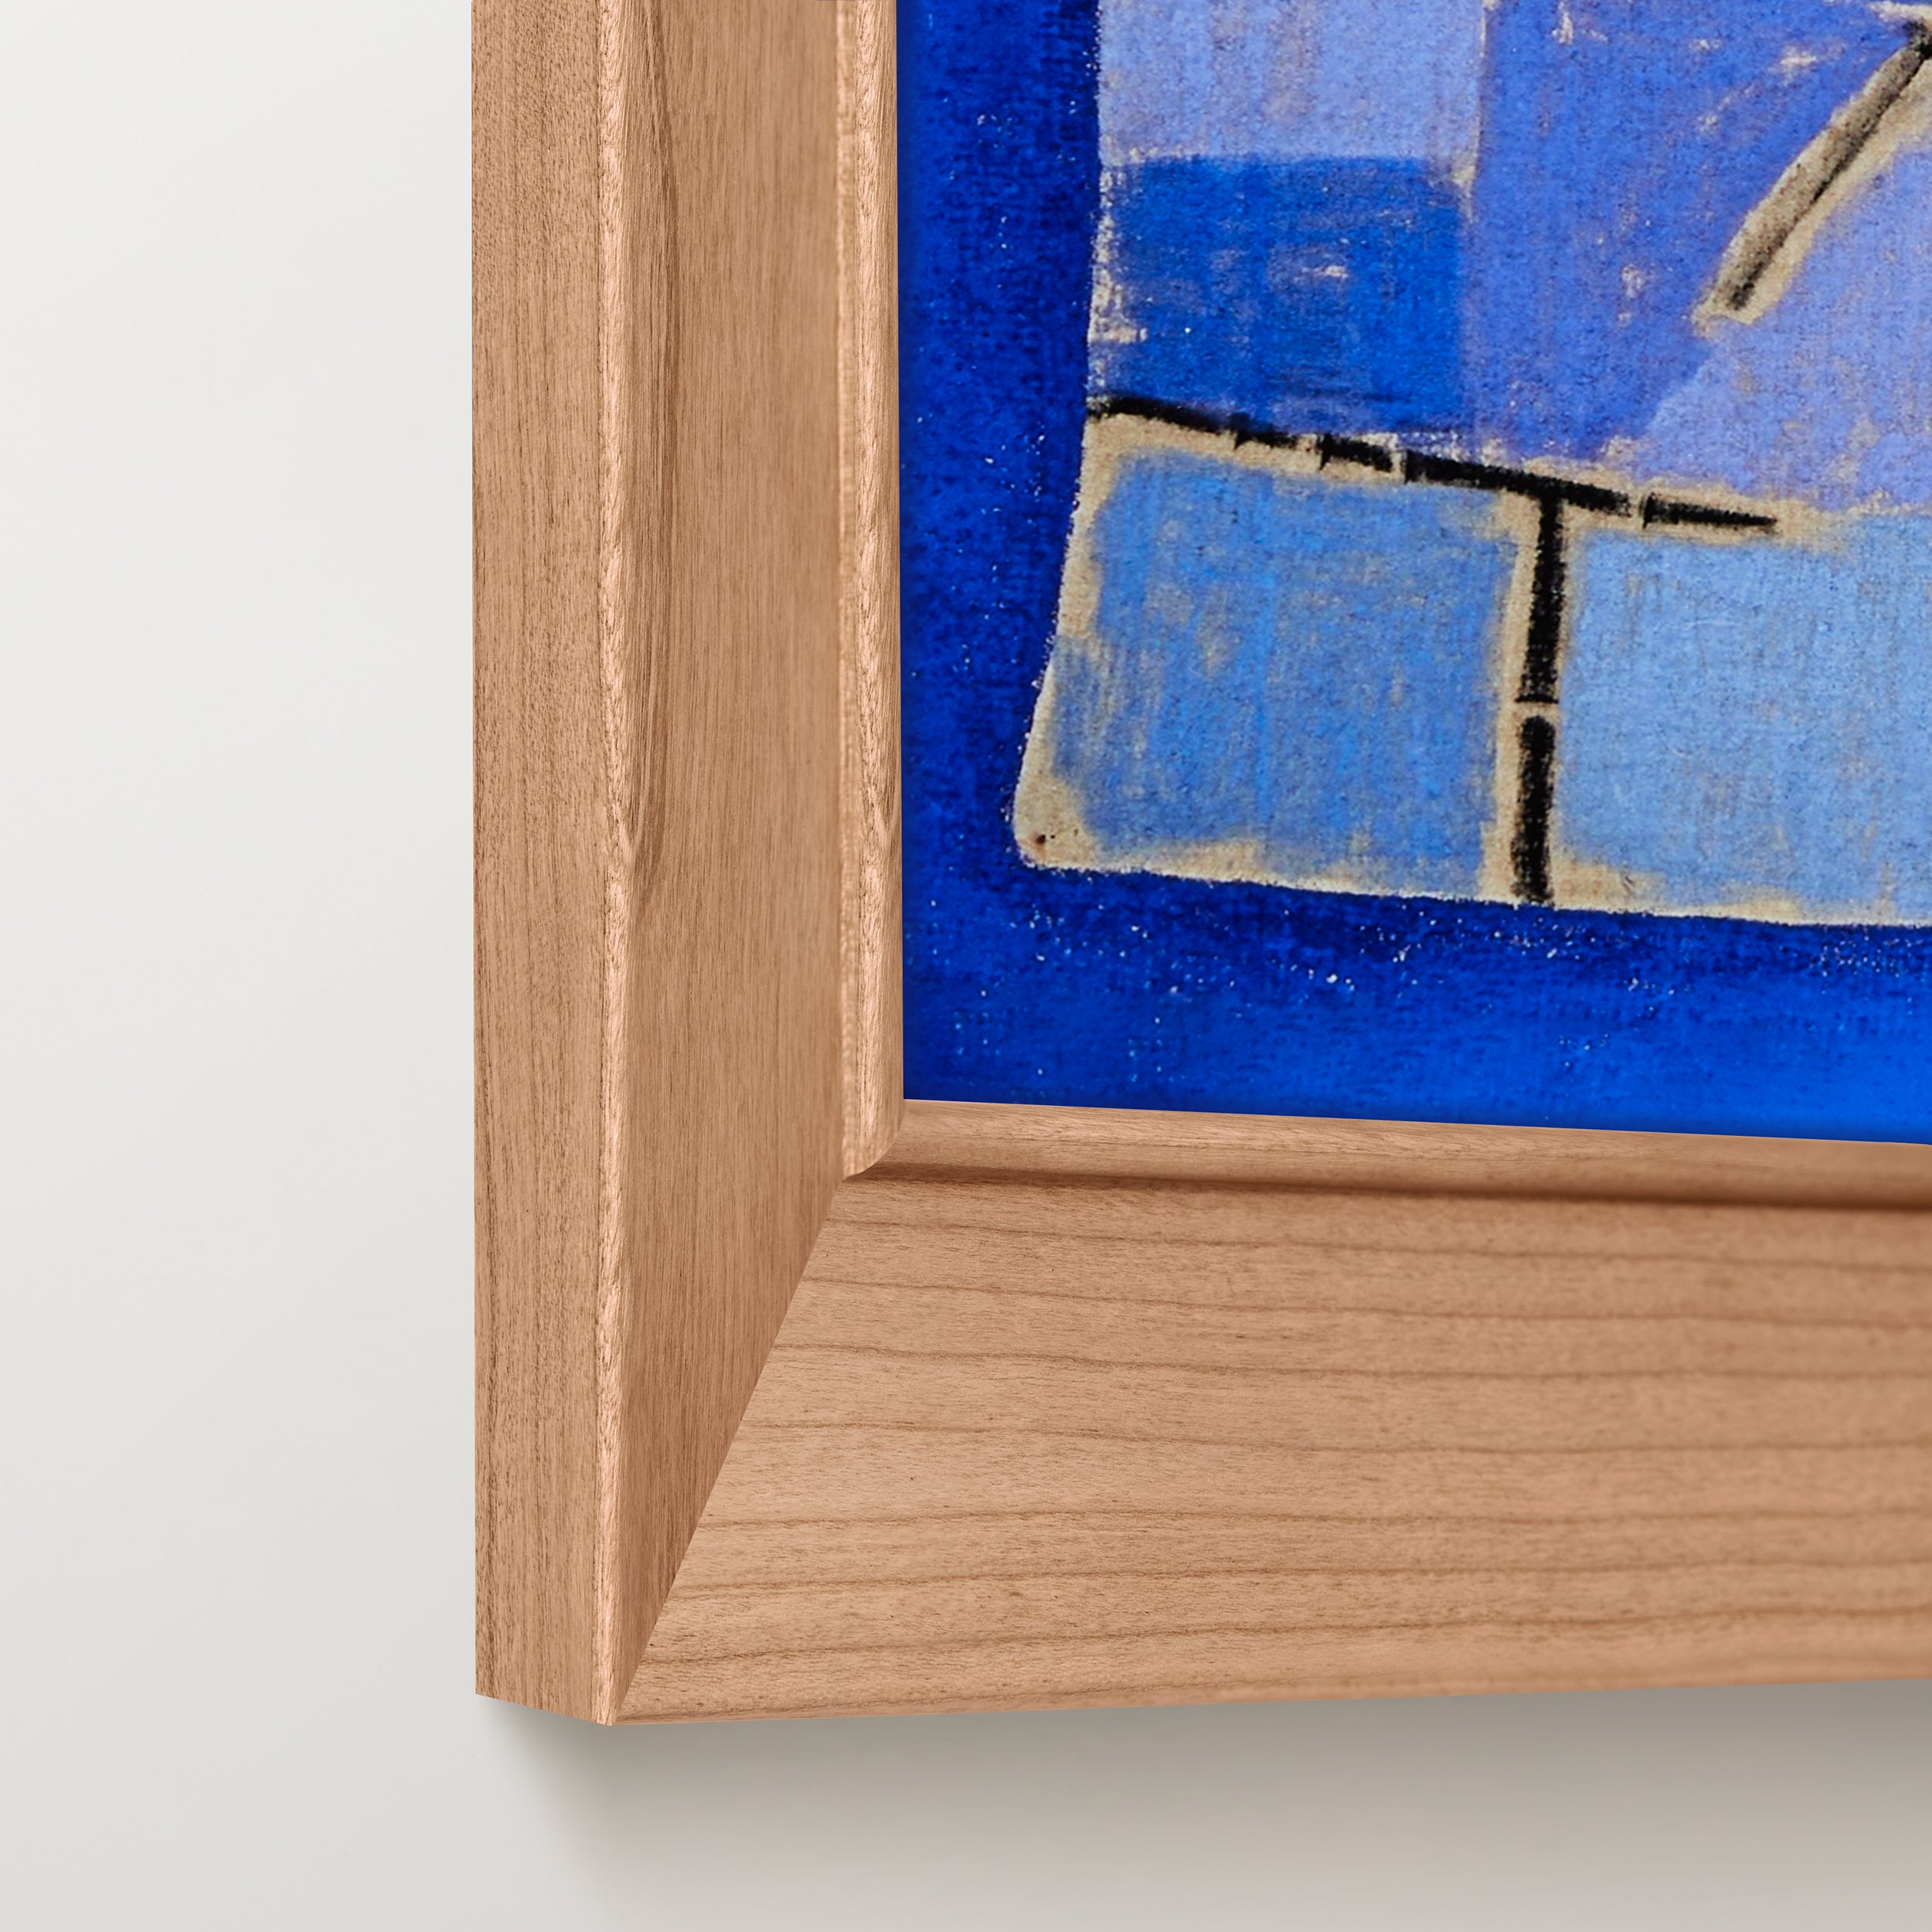 Bottom right corner of colorful blue abstract painting in a cherry angled hardwood frame